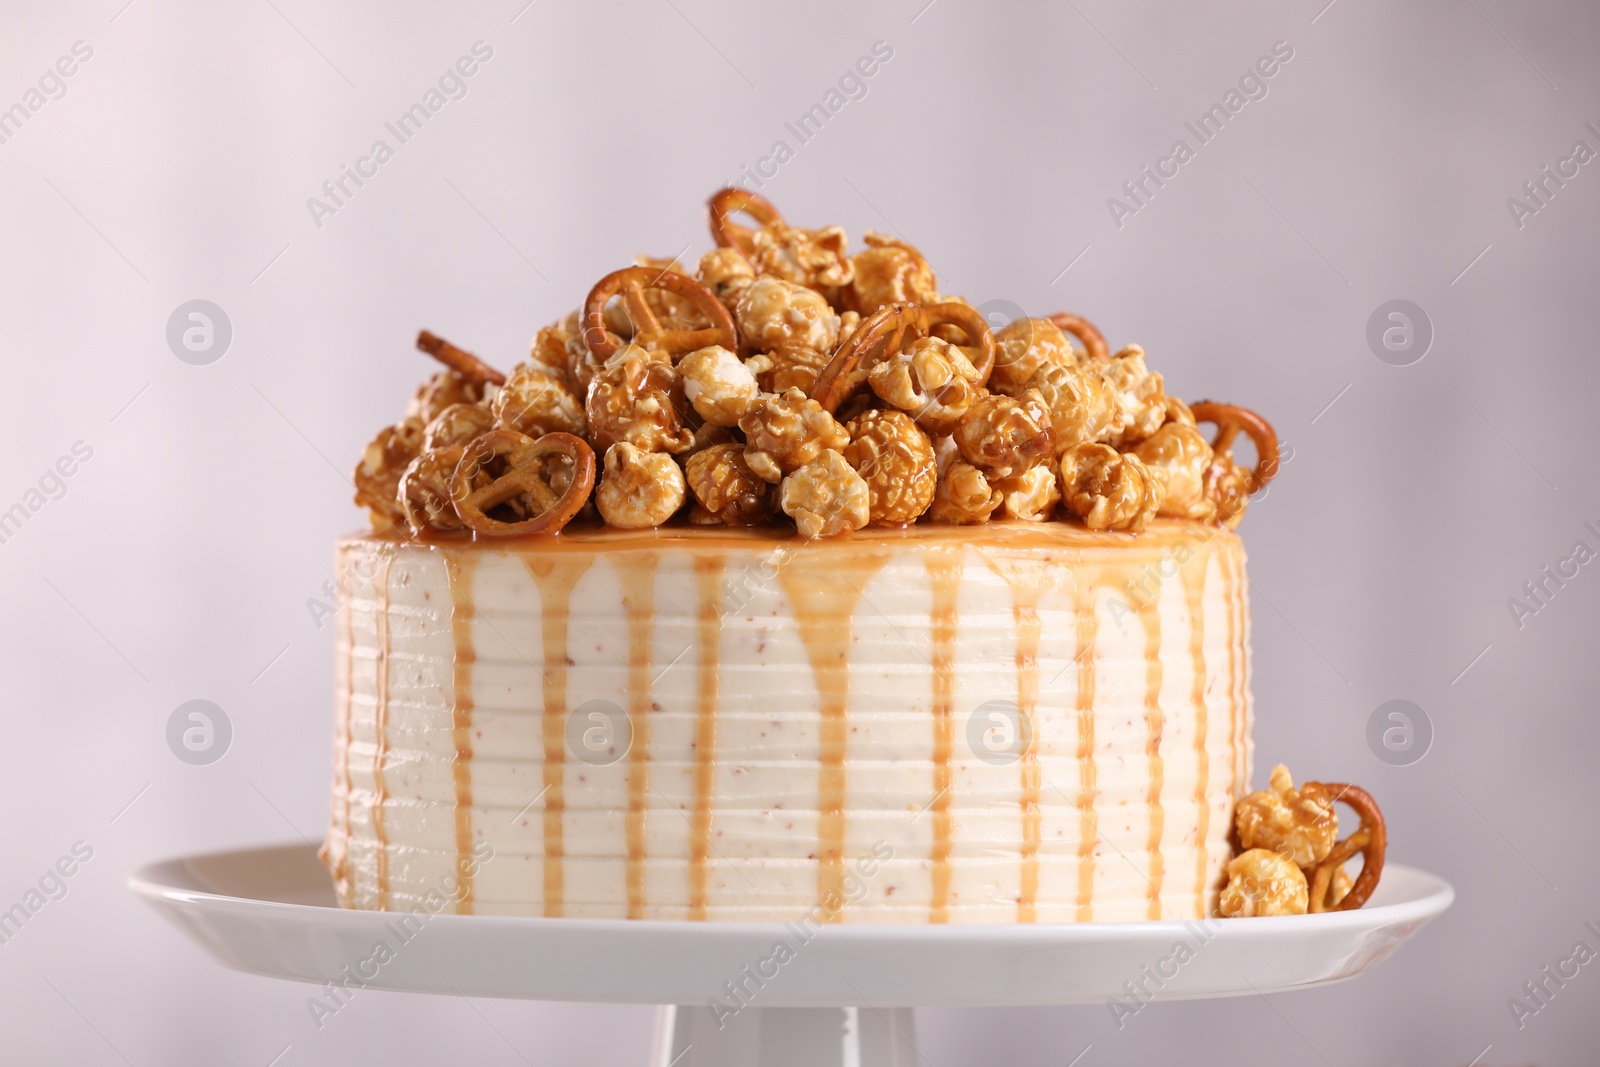 Photo of Caramel drip cake decorated with popcorn and pretzels on light background, closeup